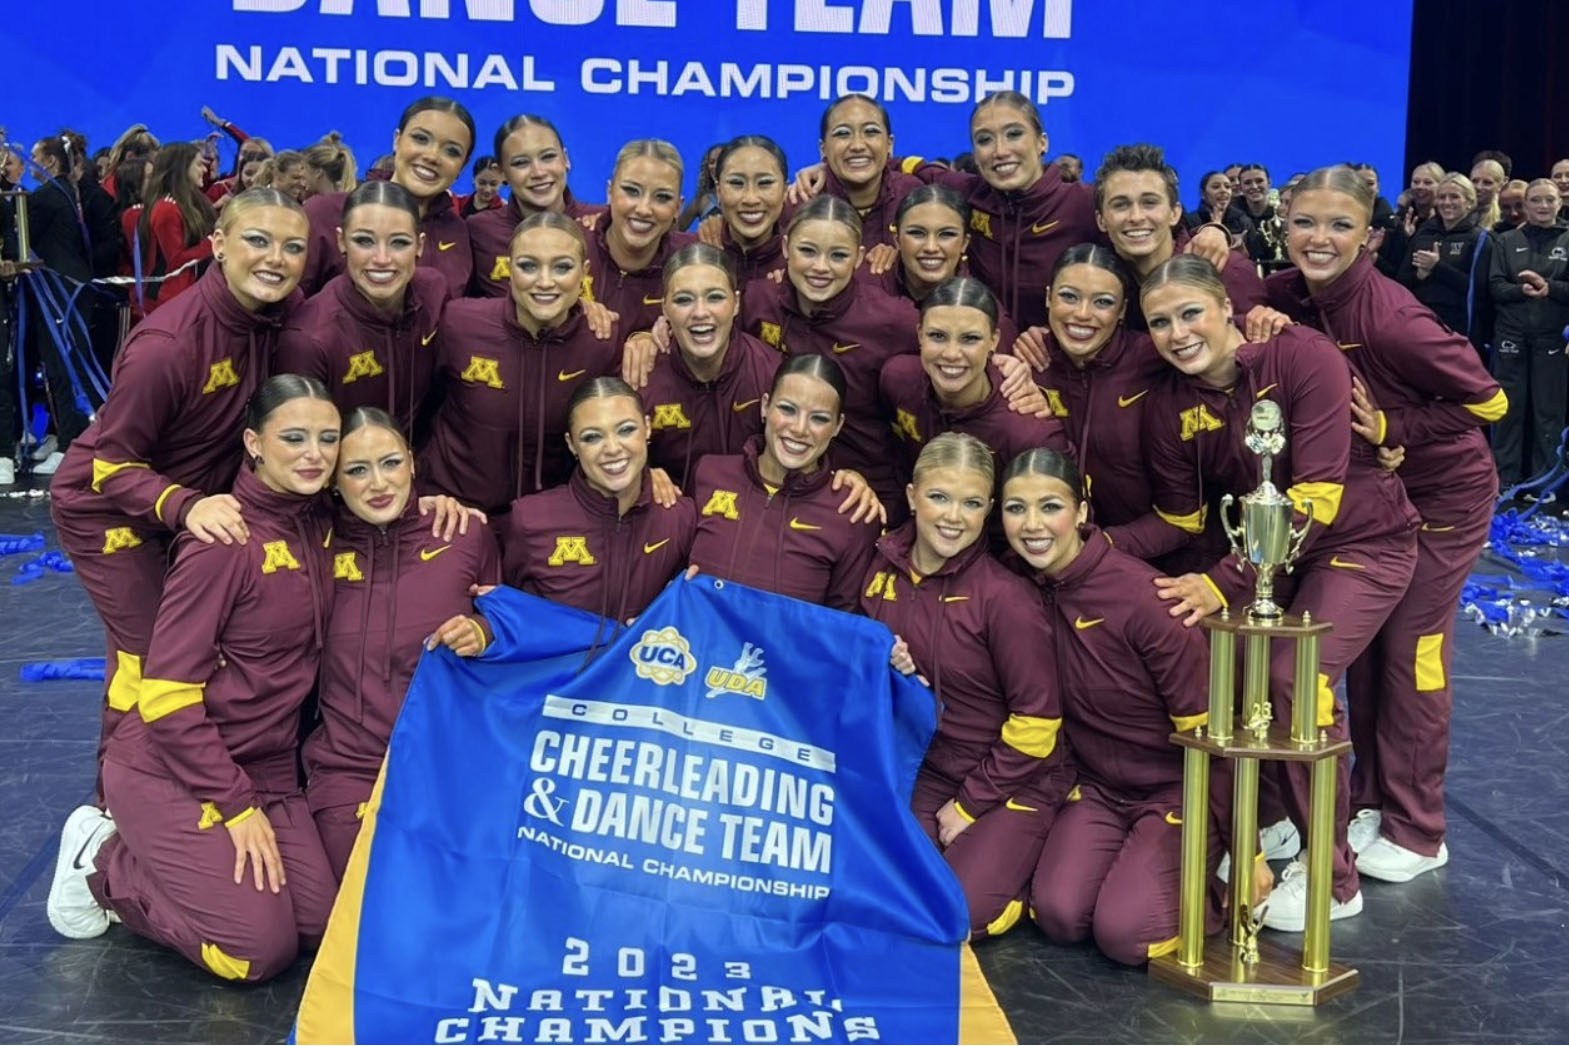 The national champion dance team poses with a banner and trophy.